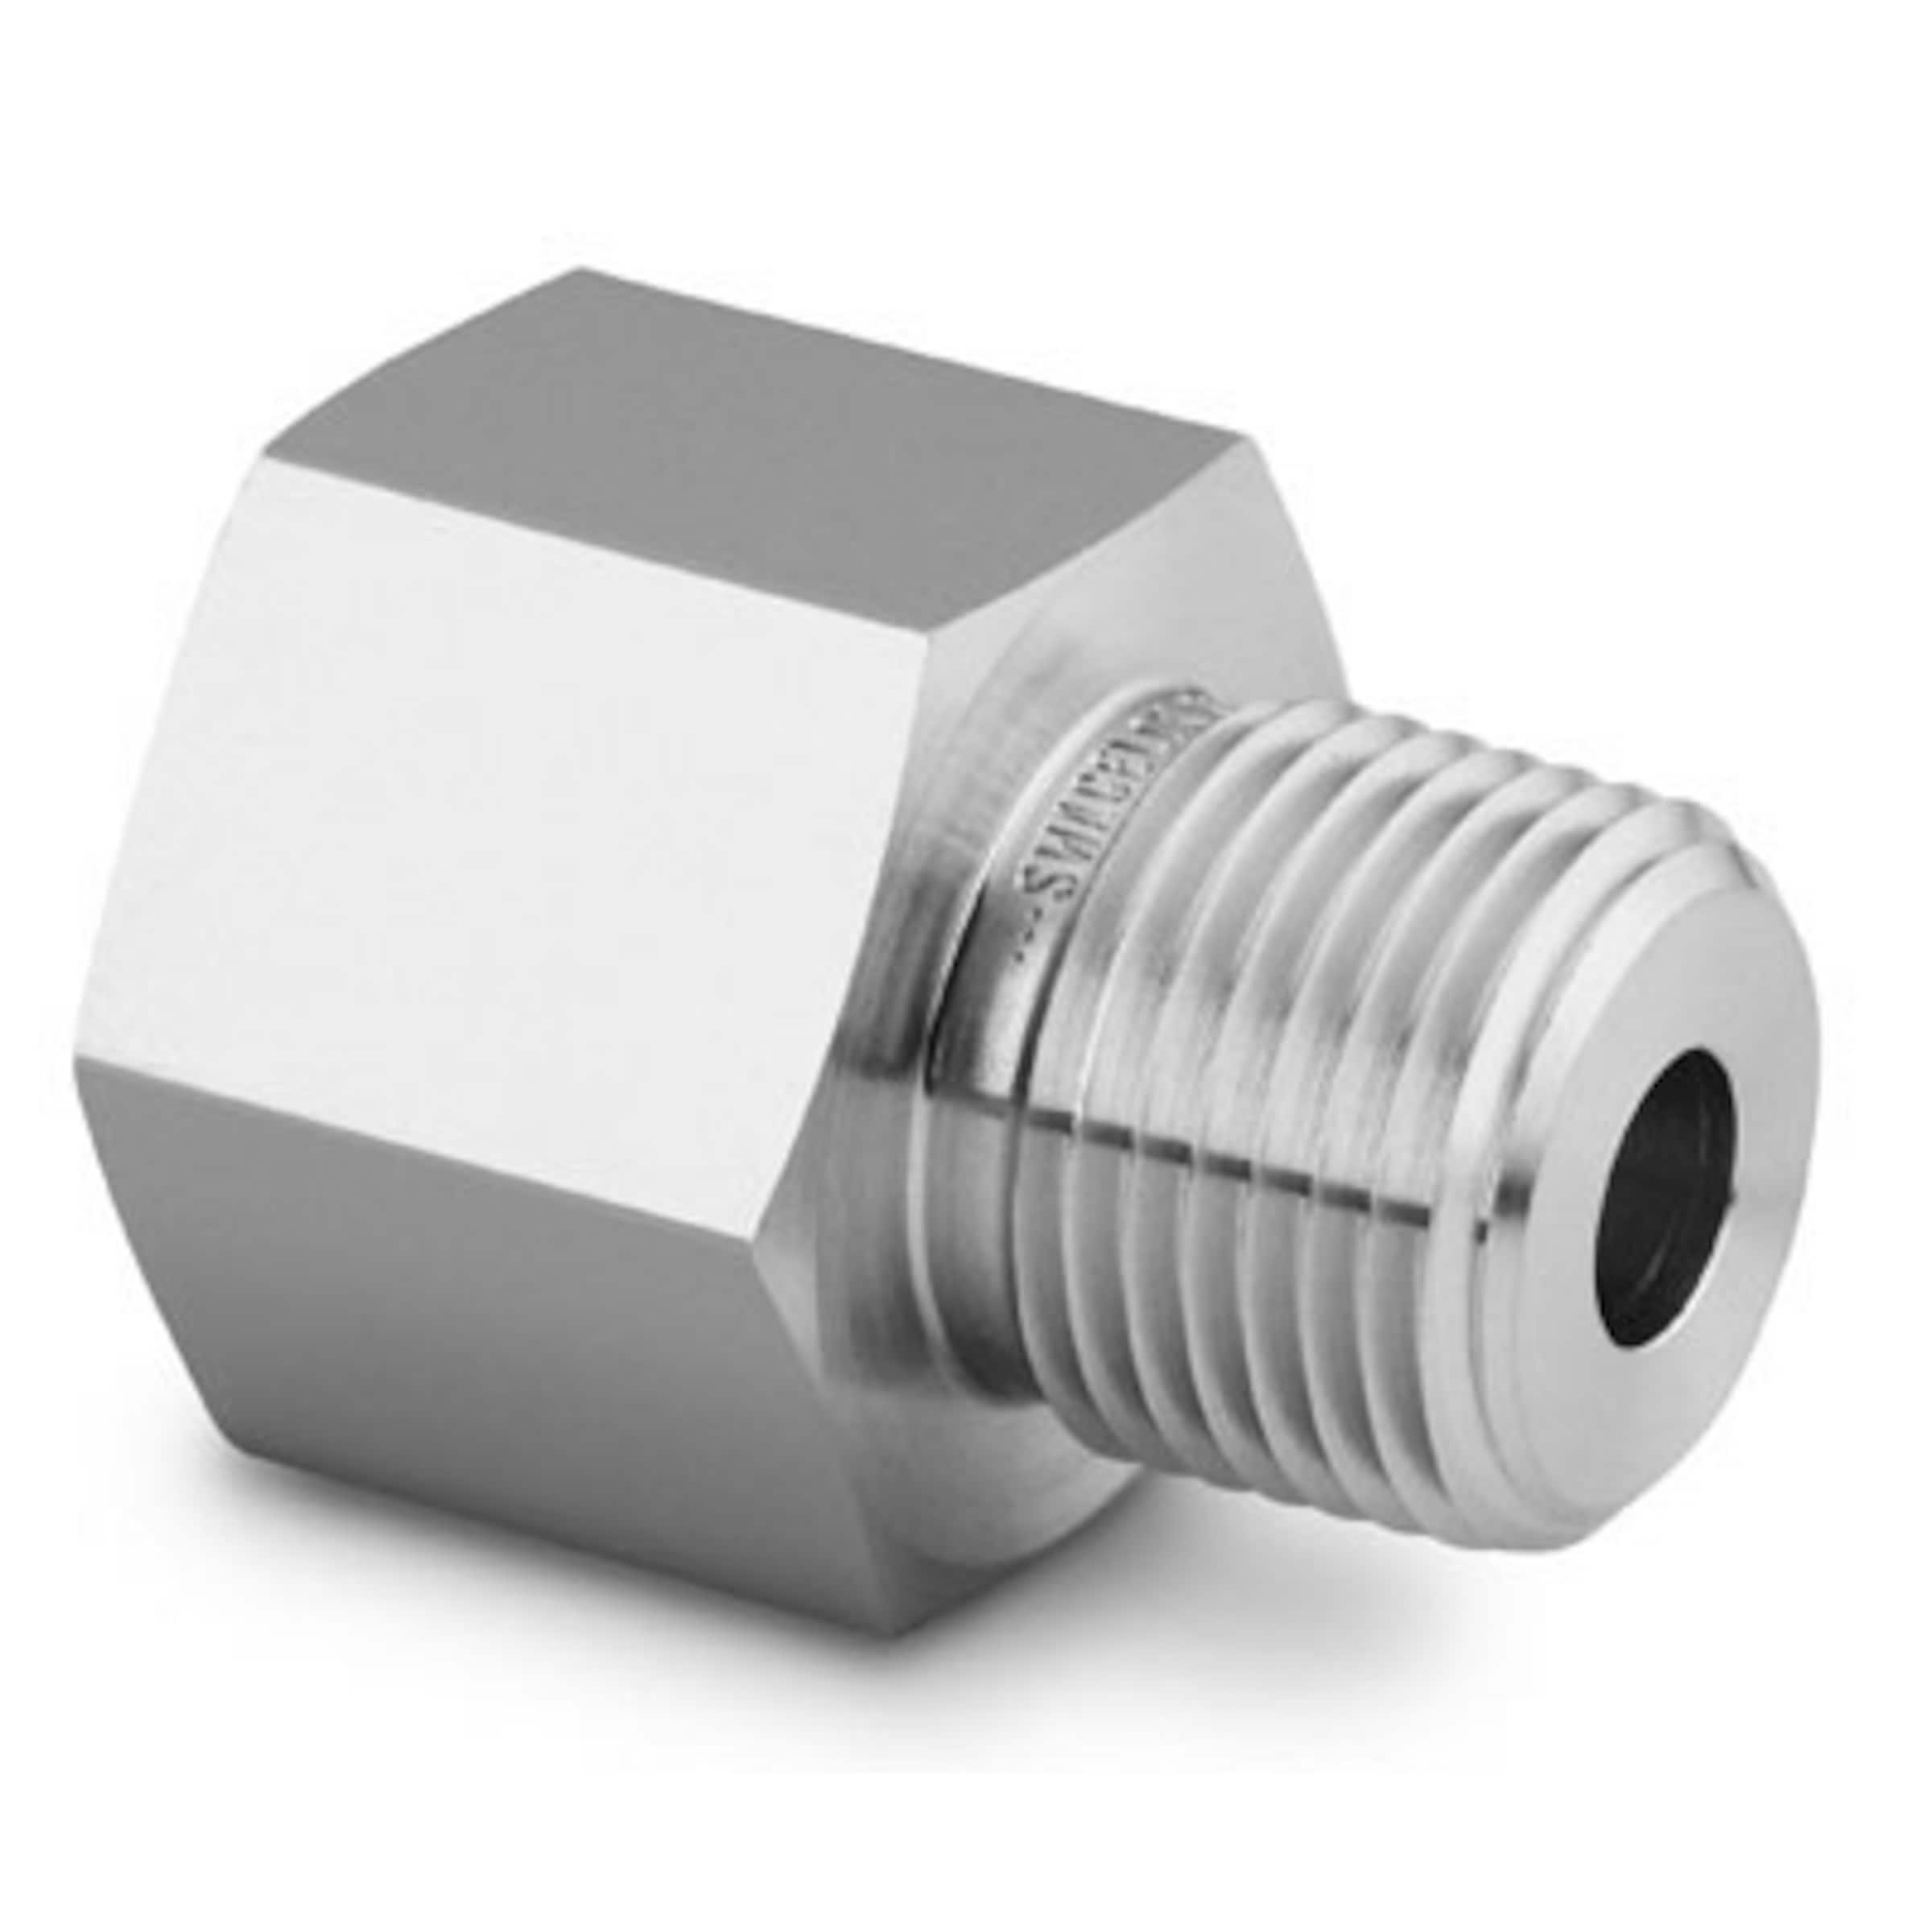 Stainless Steel Pipe Fitting, Gauge Adapter, 1/4 in. Female ISO ...